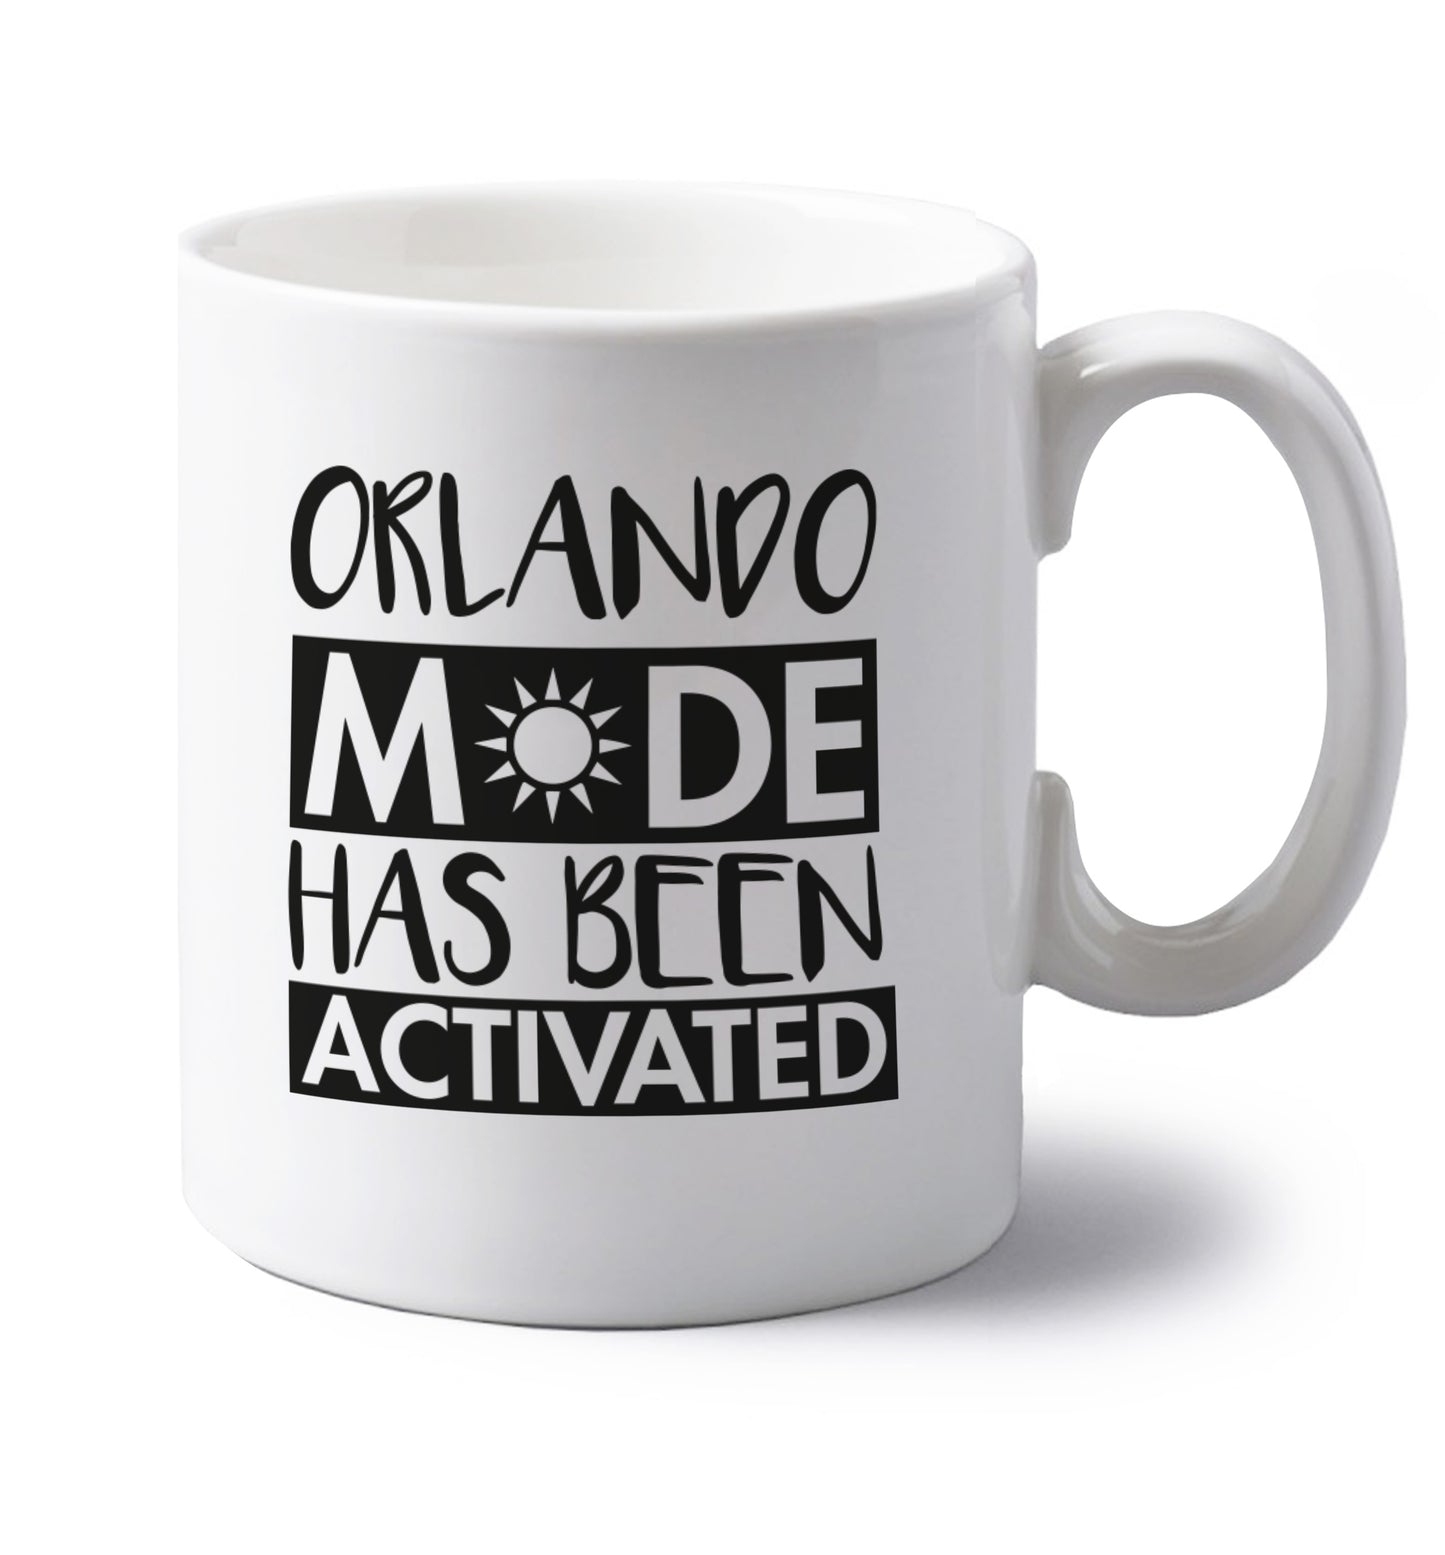 Orlando mode has been activated left handed white ceramic mug 